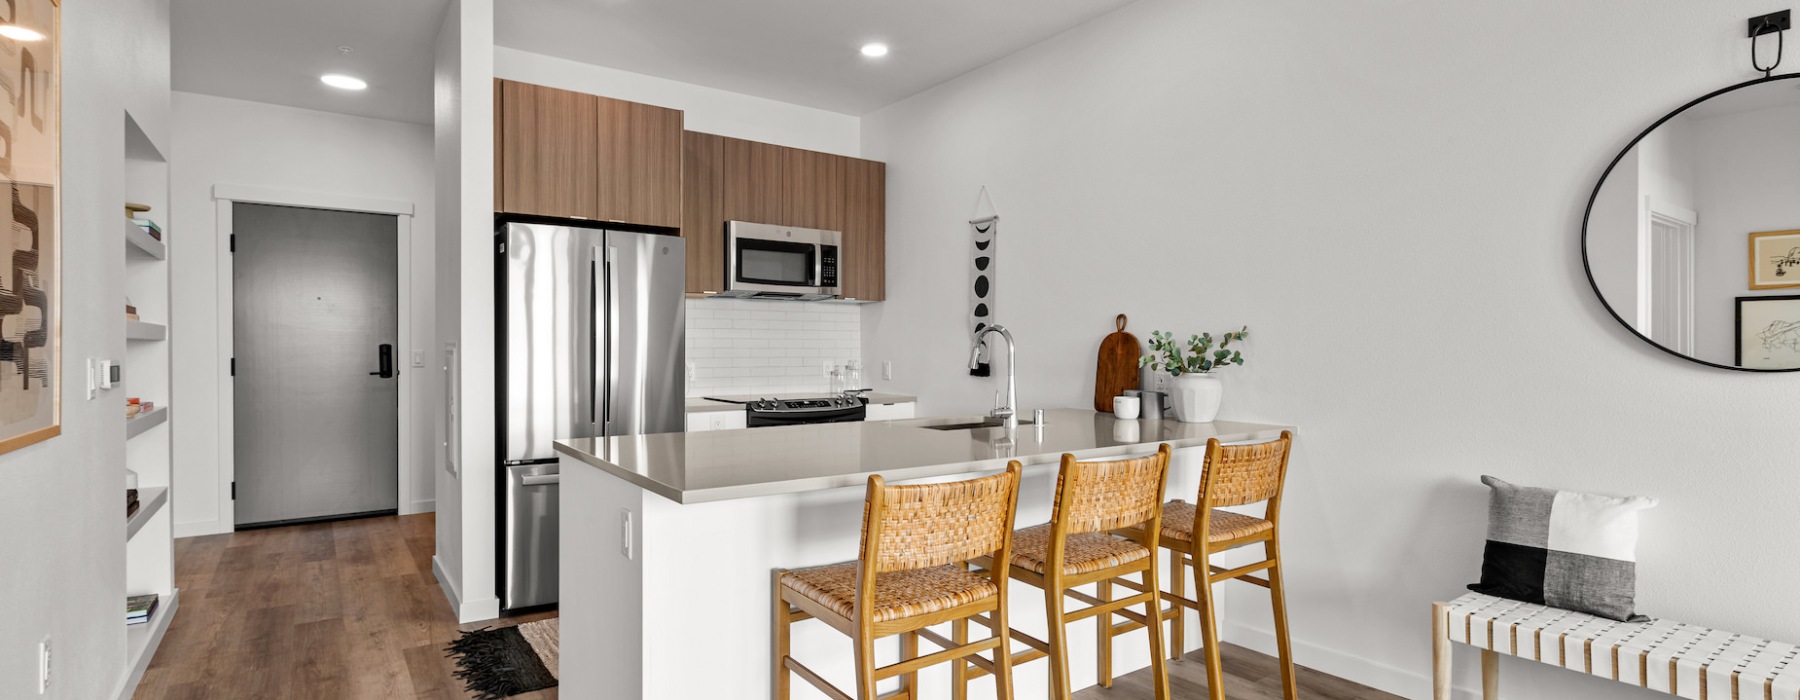 kitchen with an island, ample counter space and modern appliances